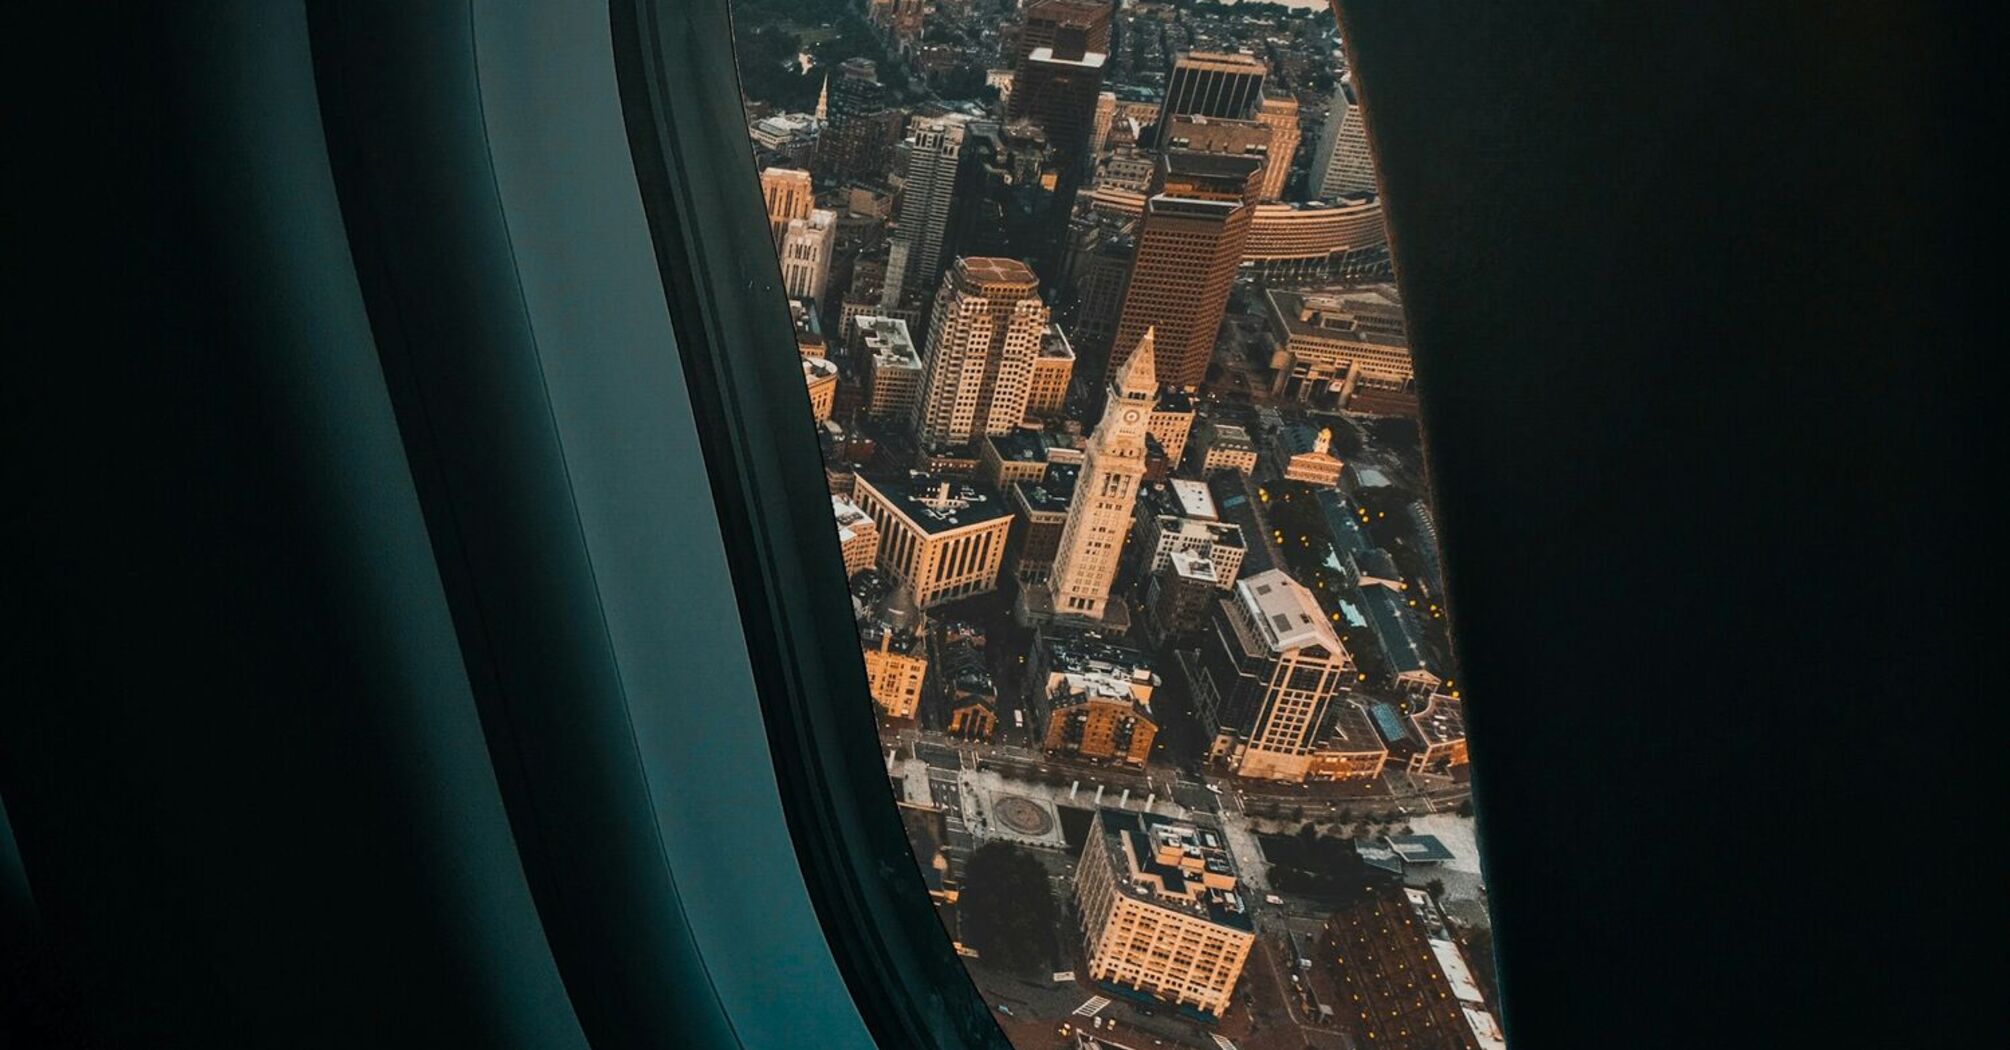 View of a cityscape through an airplane window